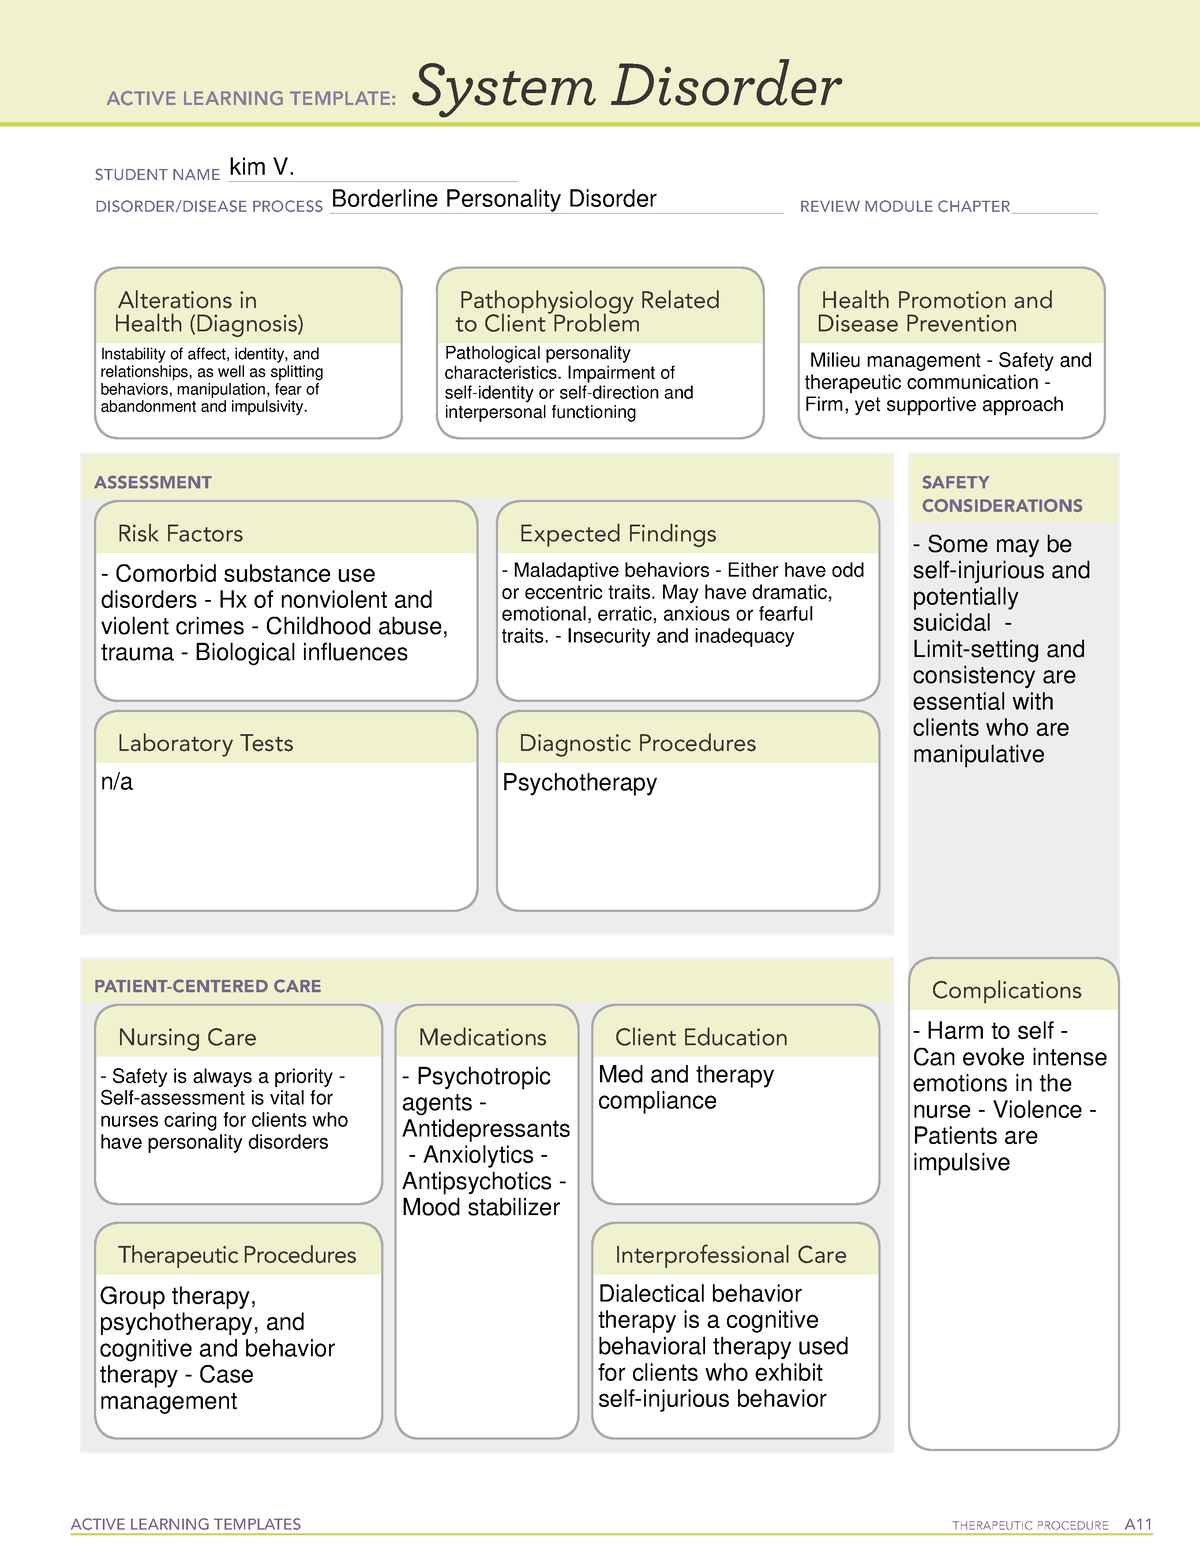 BPD Borderline personality disorder ACTIVE LEARNING TEMPLATES